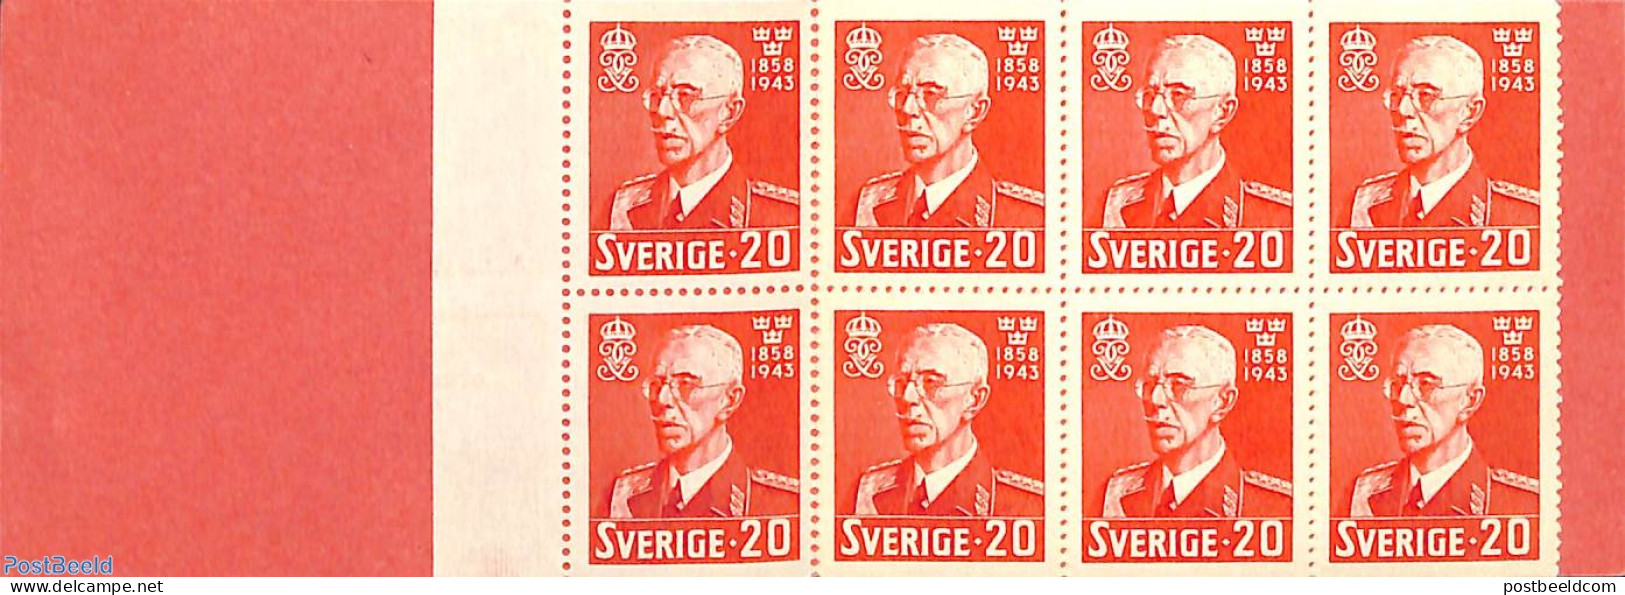 Sweden 1943 King Gustav V 85th Anniversary, Booklet, Mint NH, History - Kings & Queens (Royalty) - Stamp Booklets - Nuevos